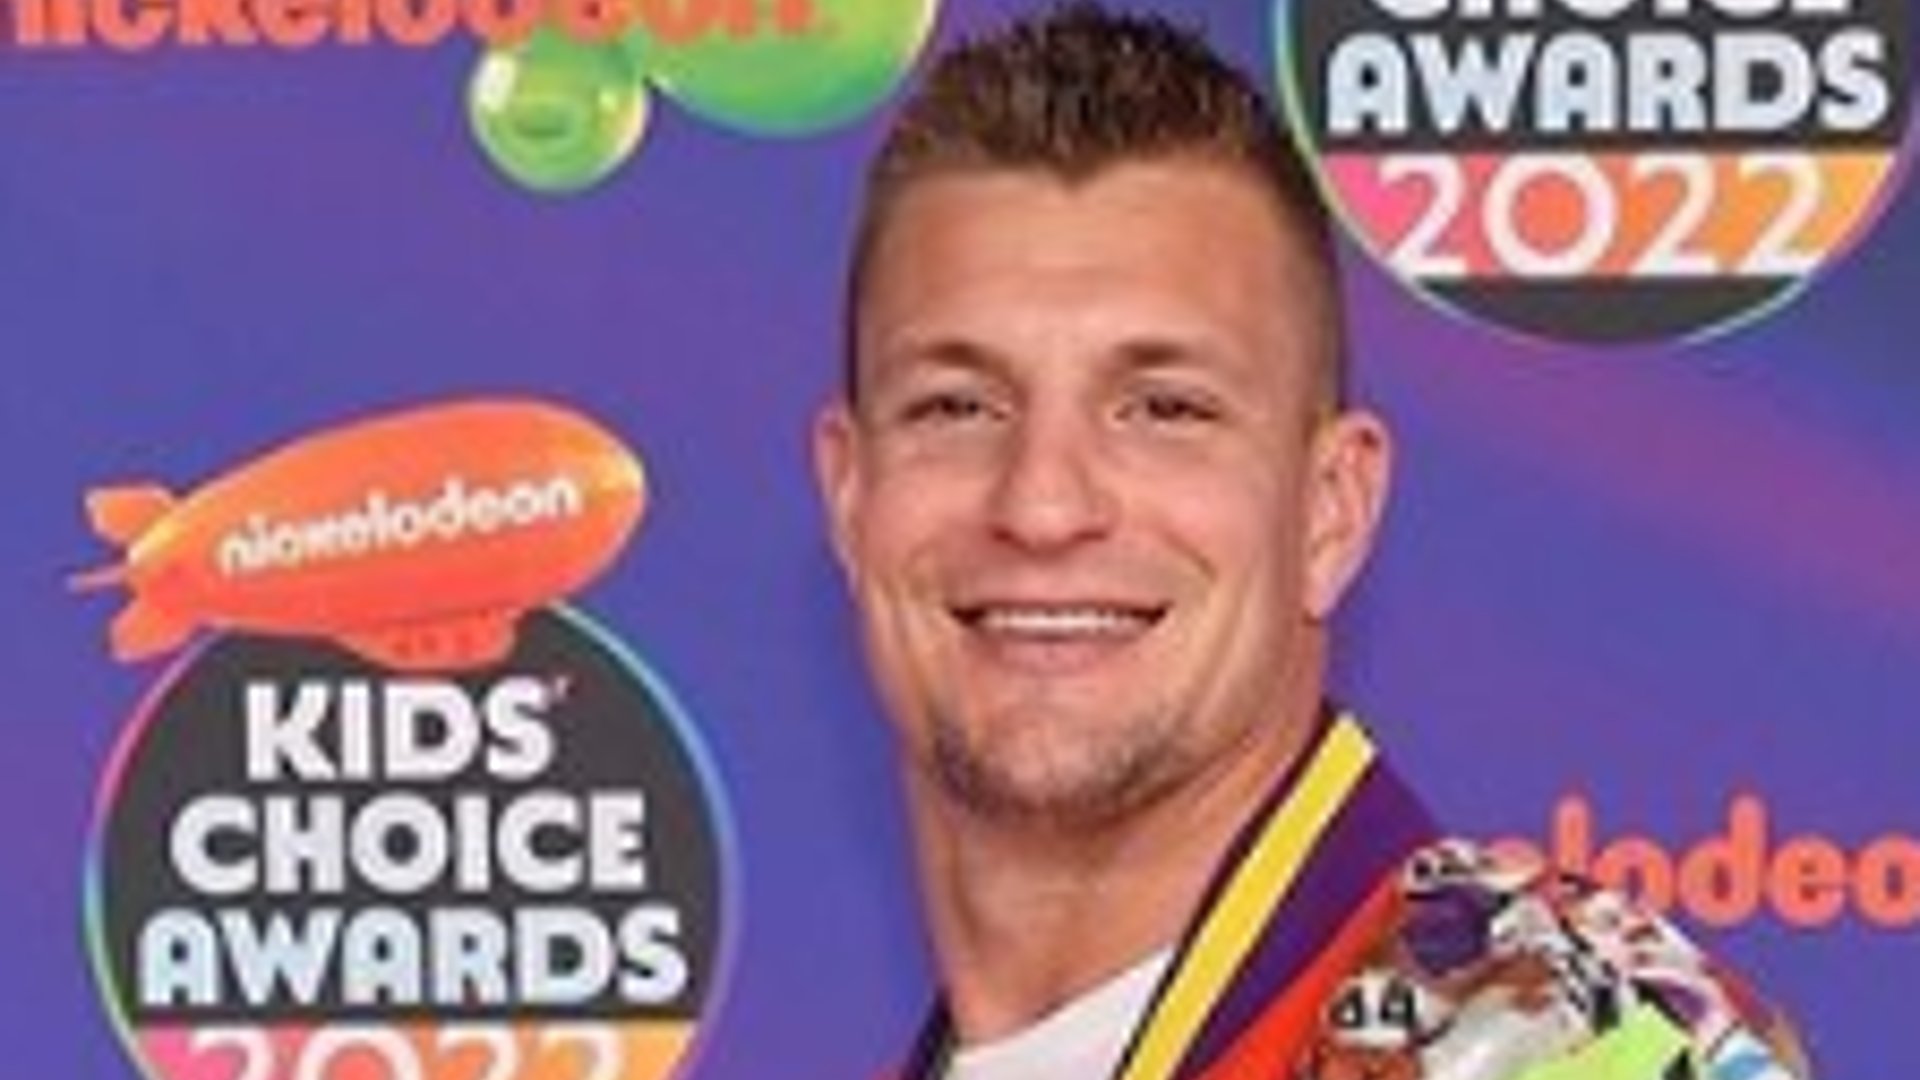 What is Rob Gronkowski networth, salary, and brand endorsement?